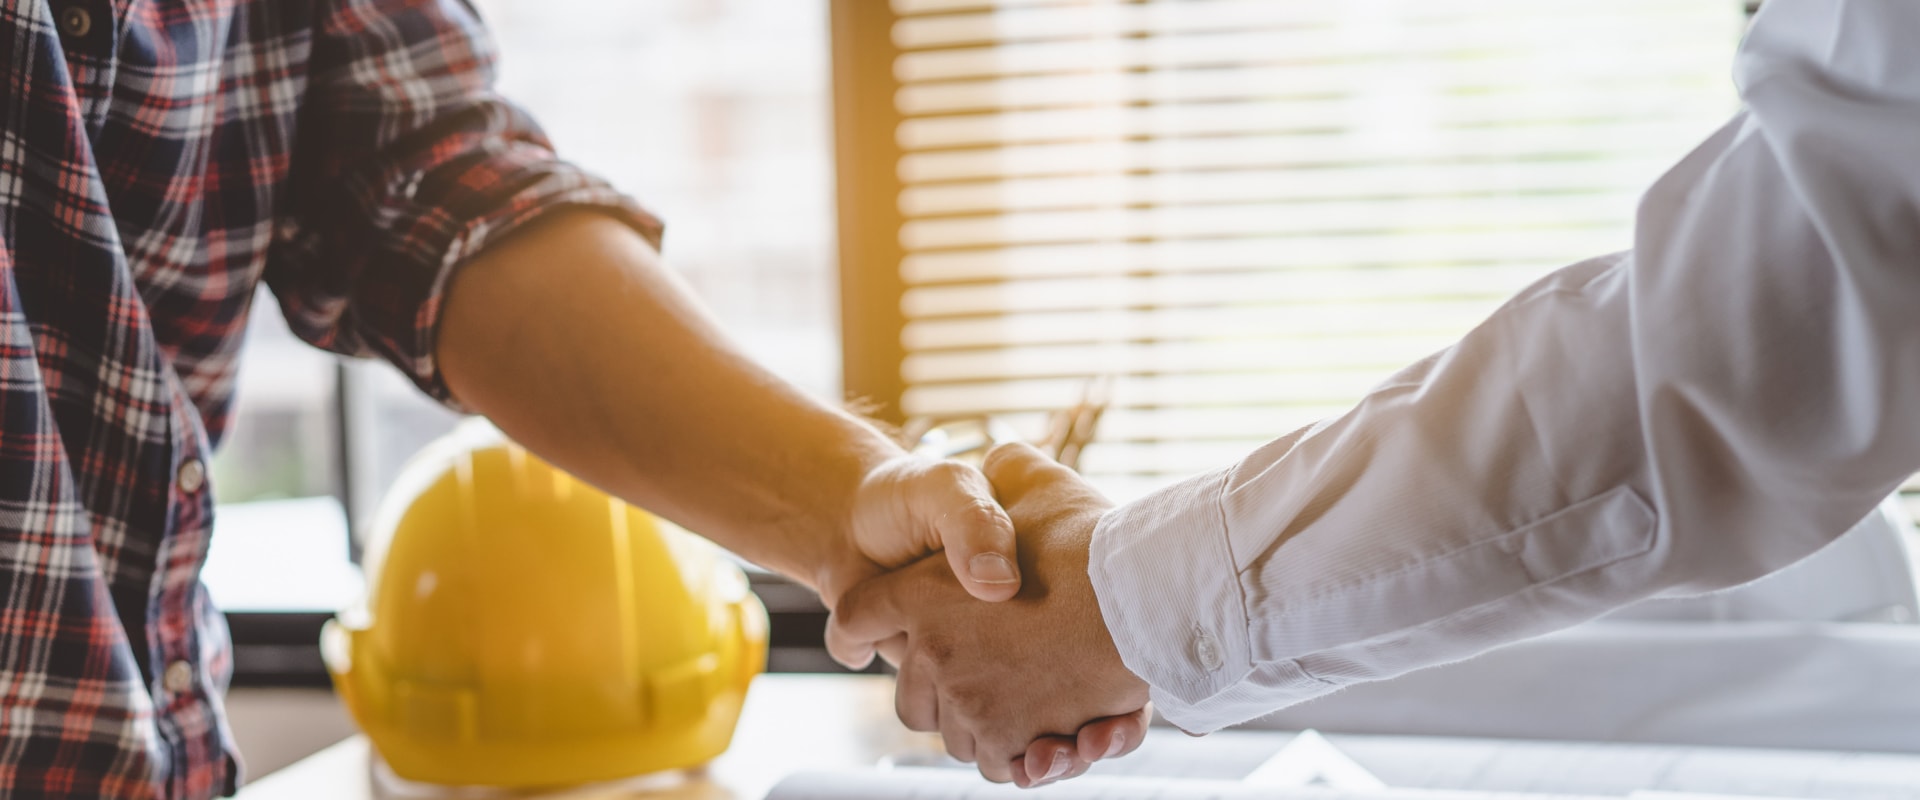 What is in a construction contract?